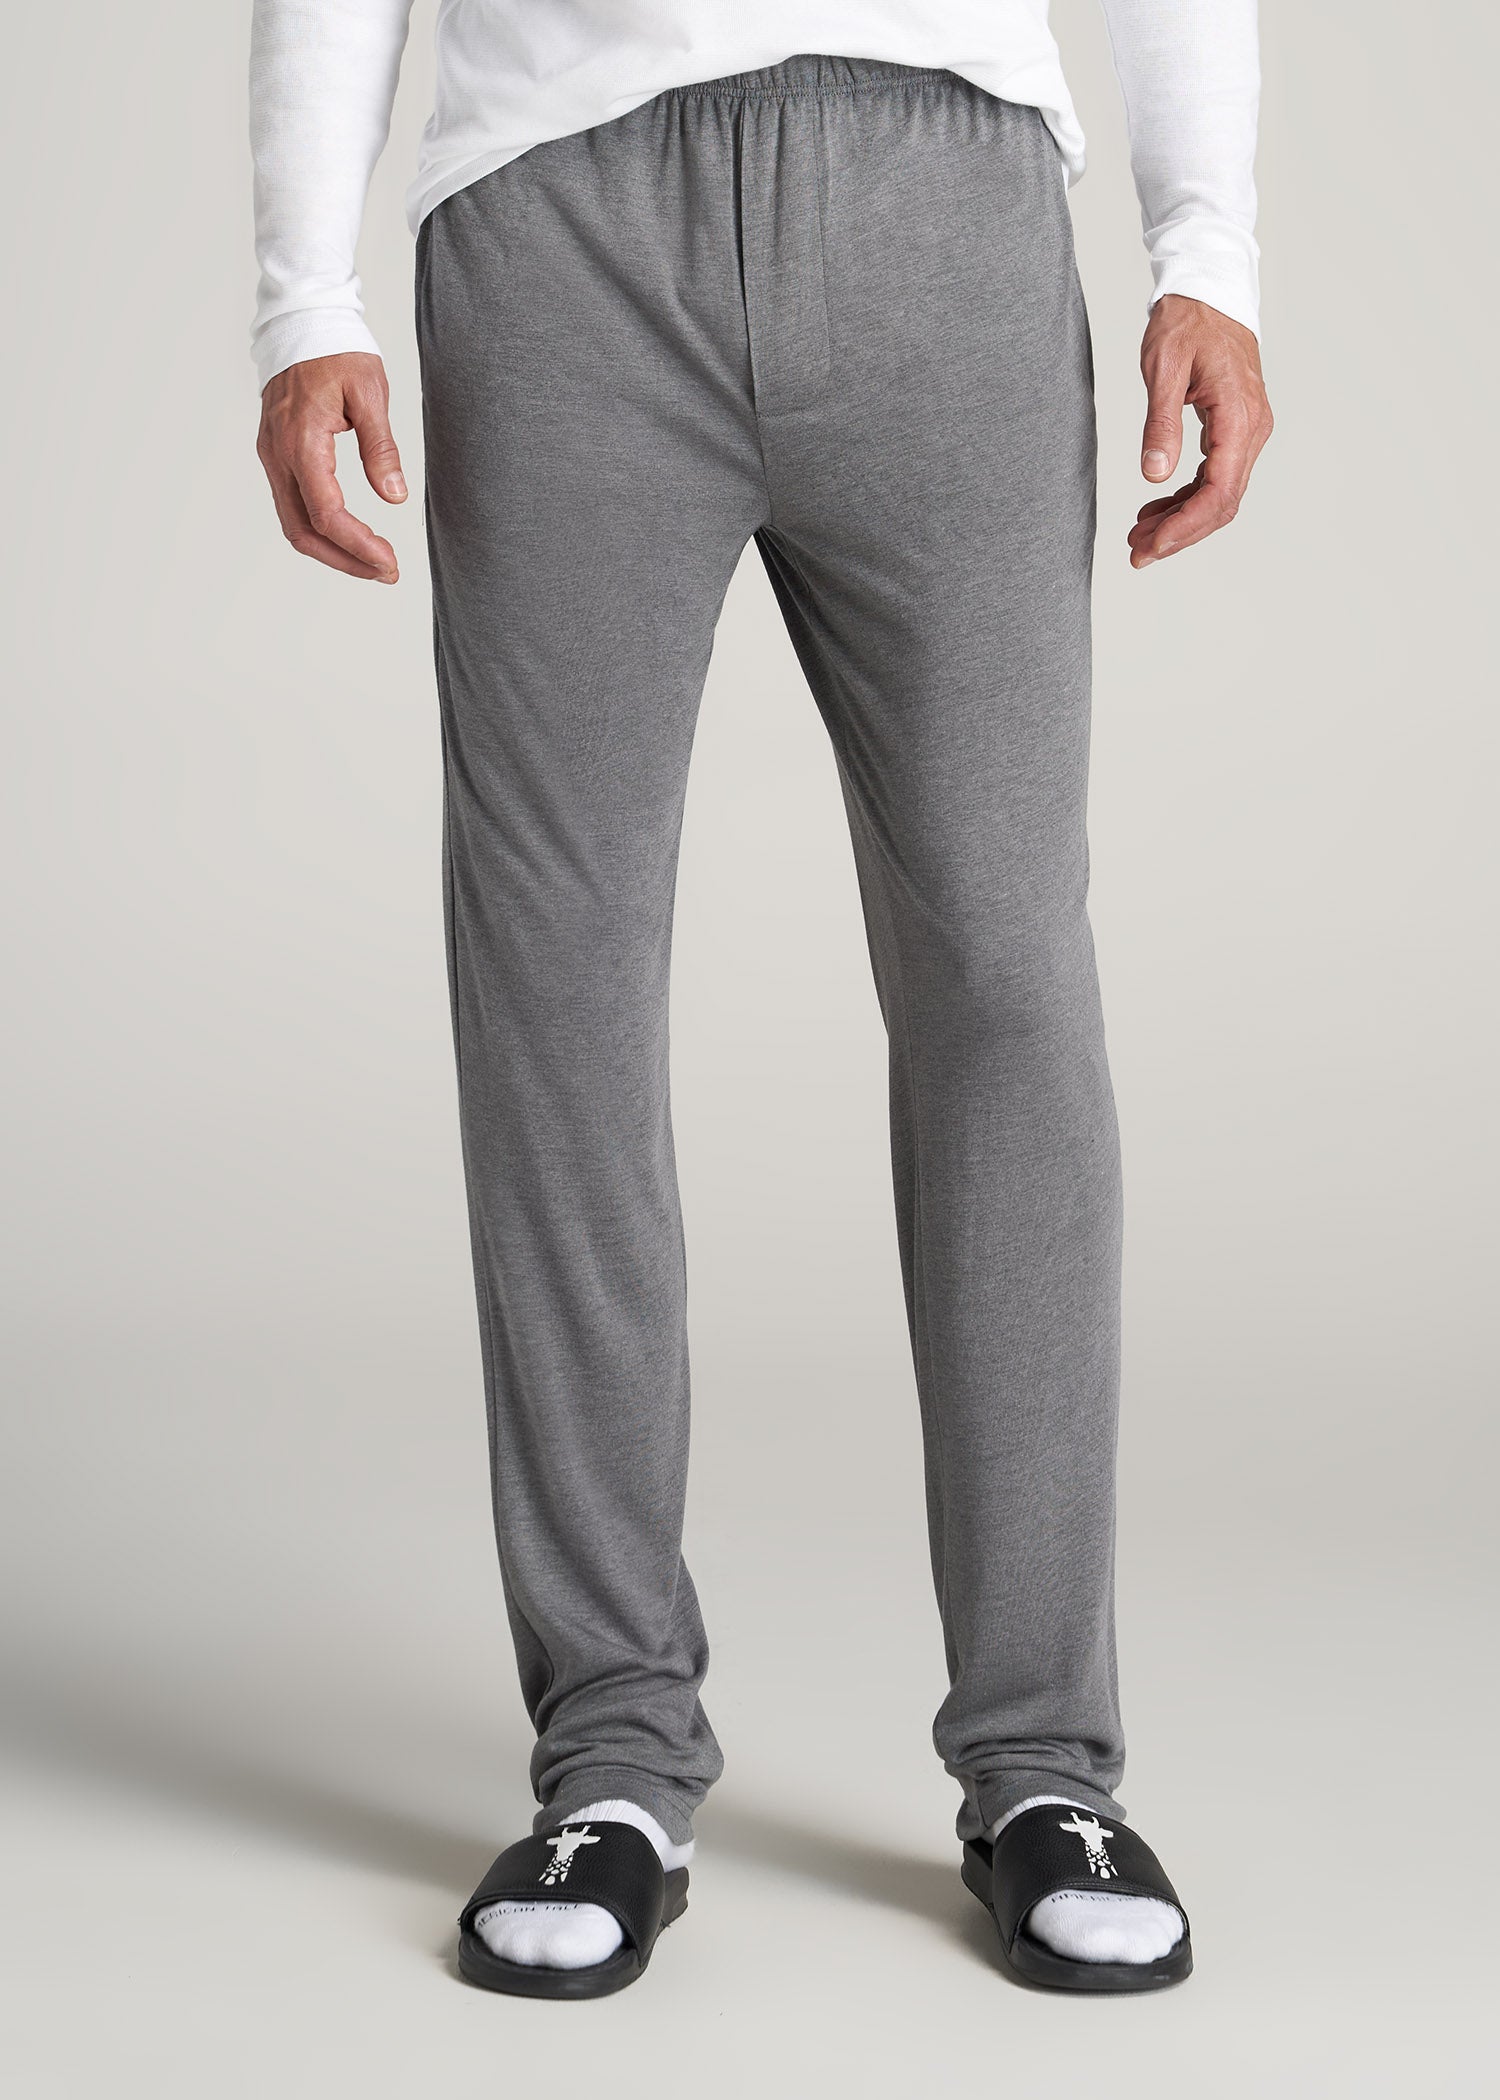 Charcoal Mix Tall Lounge Pant For Men